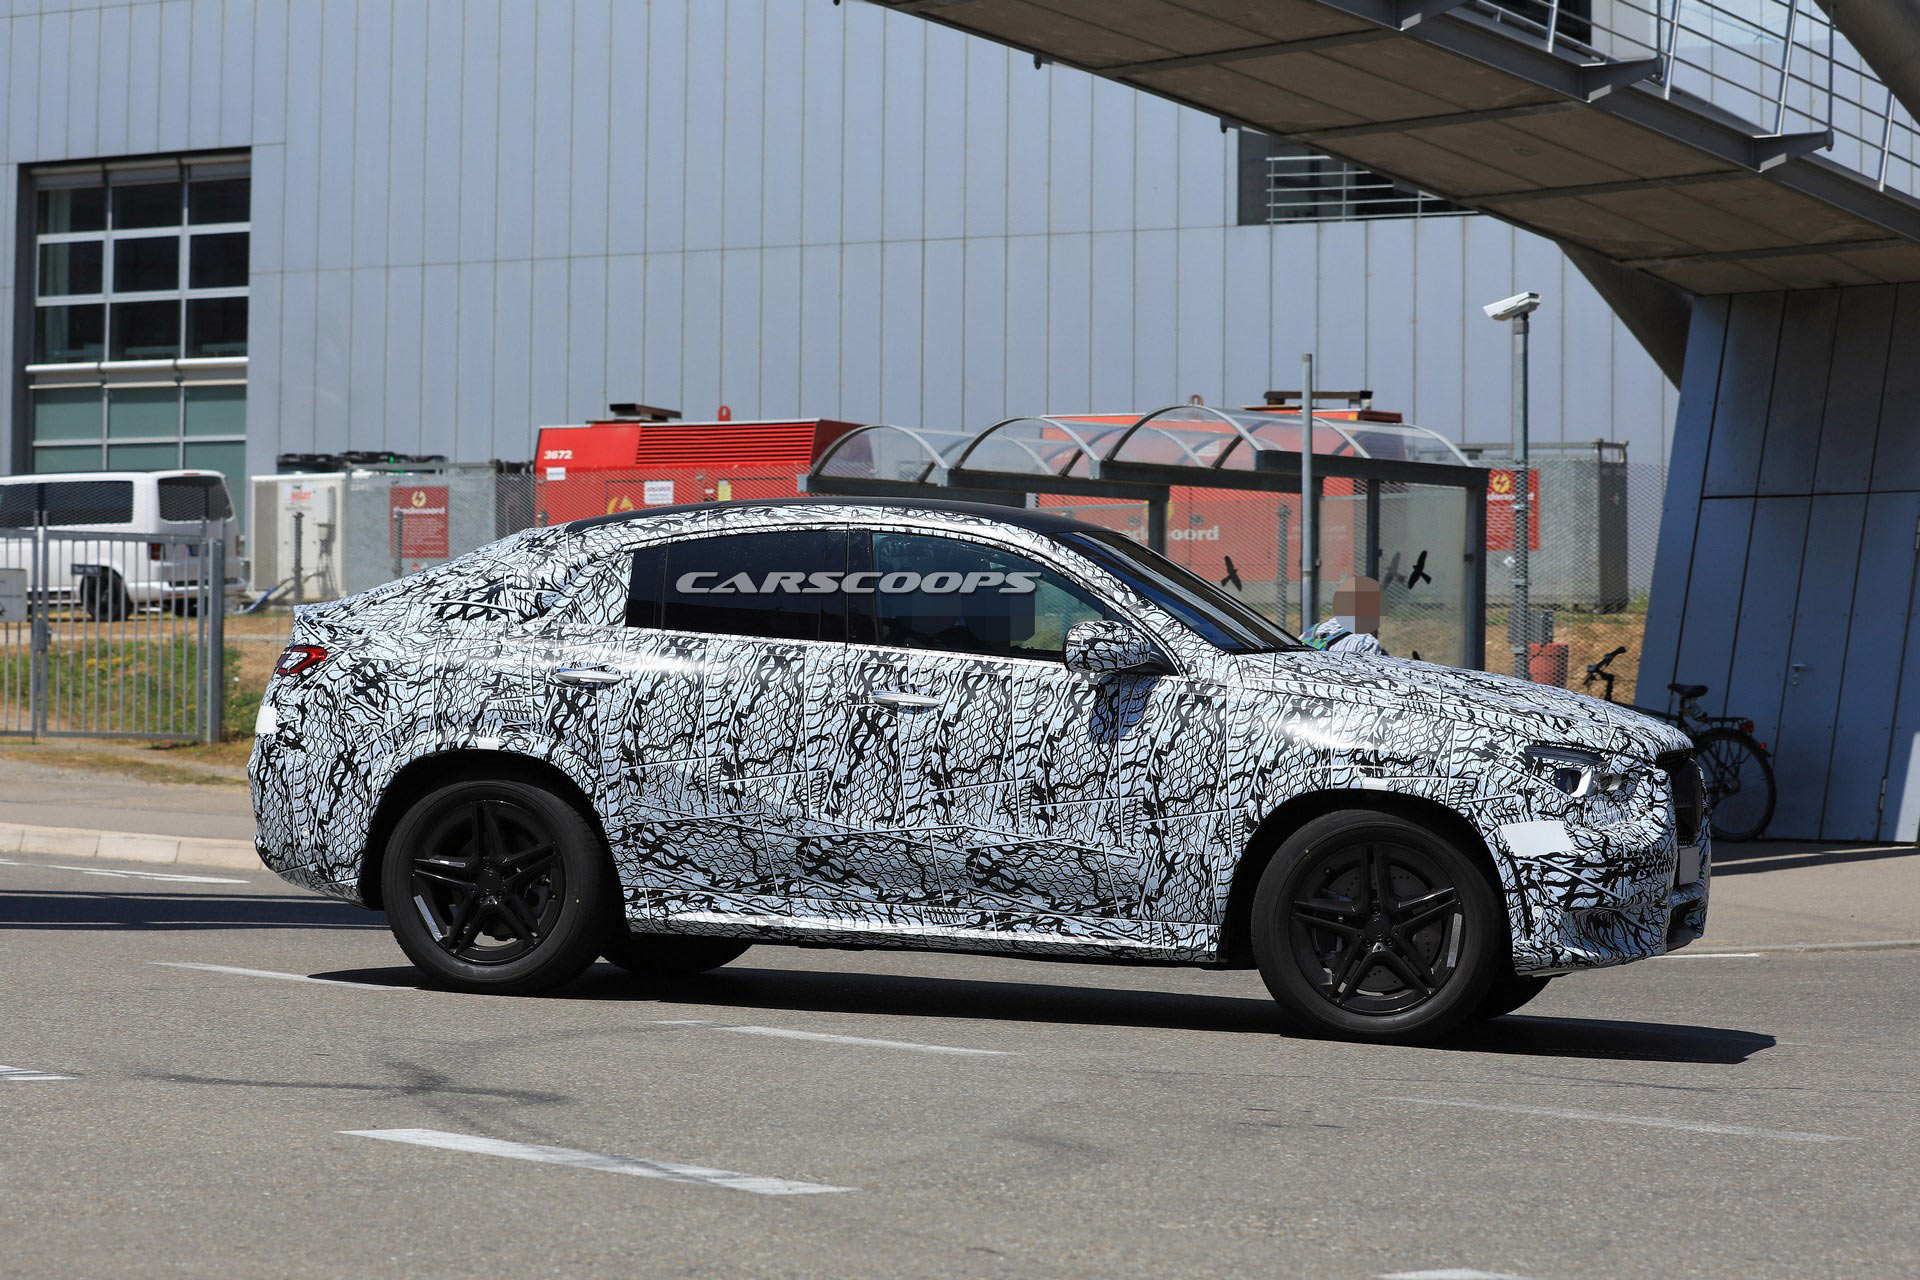 2020 Mercedes Gle Coupe Gets A Sleeker Design To Battle The